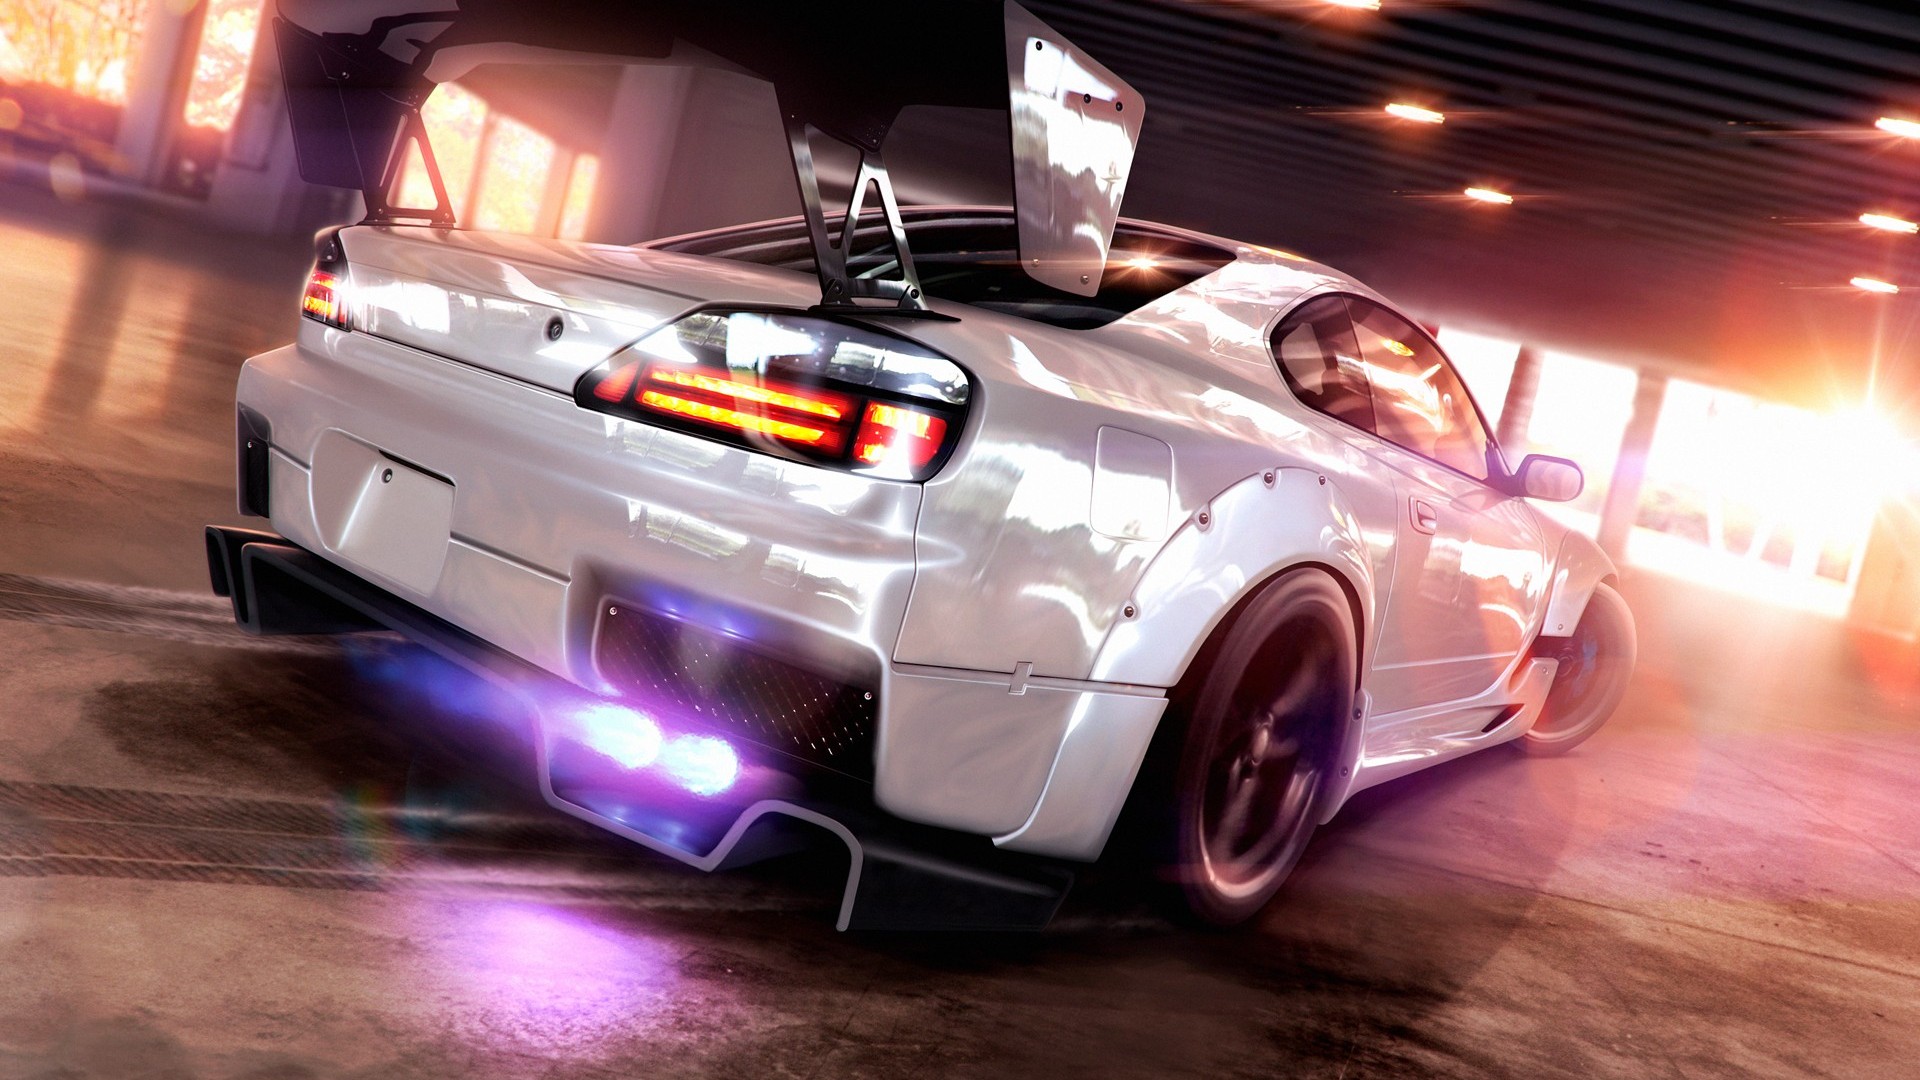 Need For Speed Wallpaper